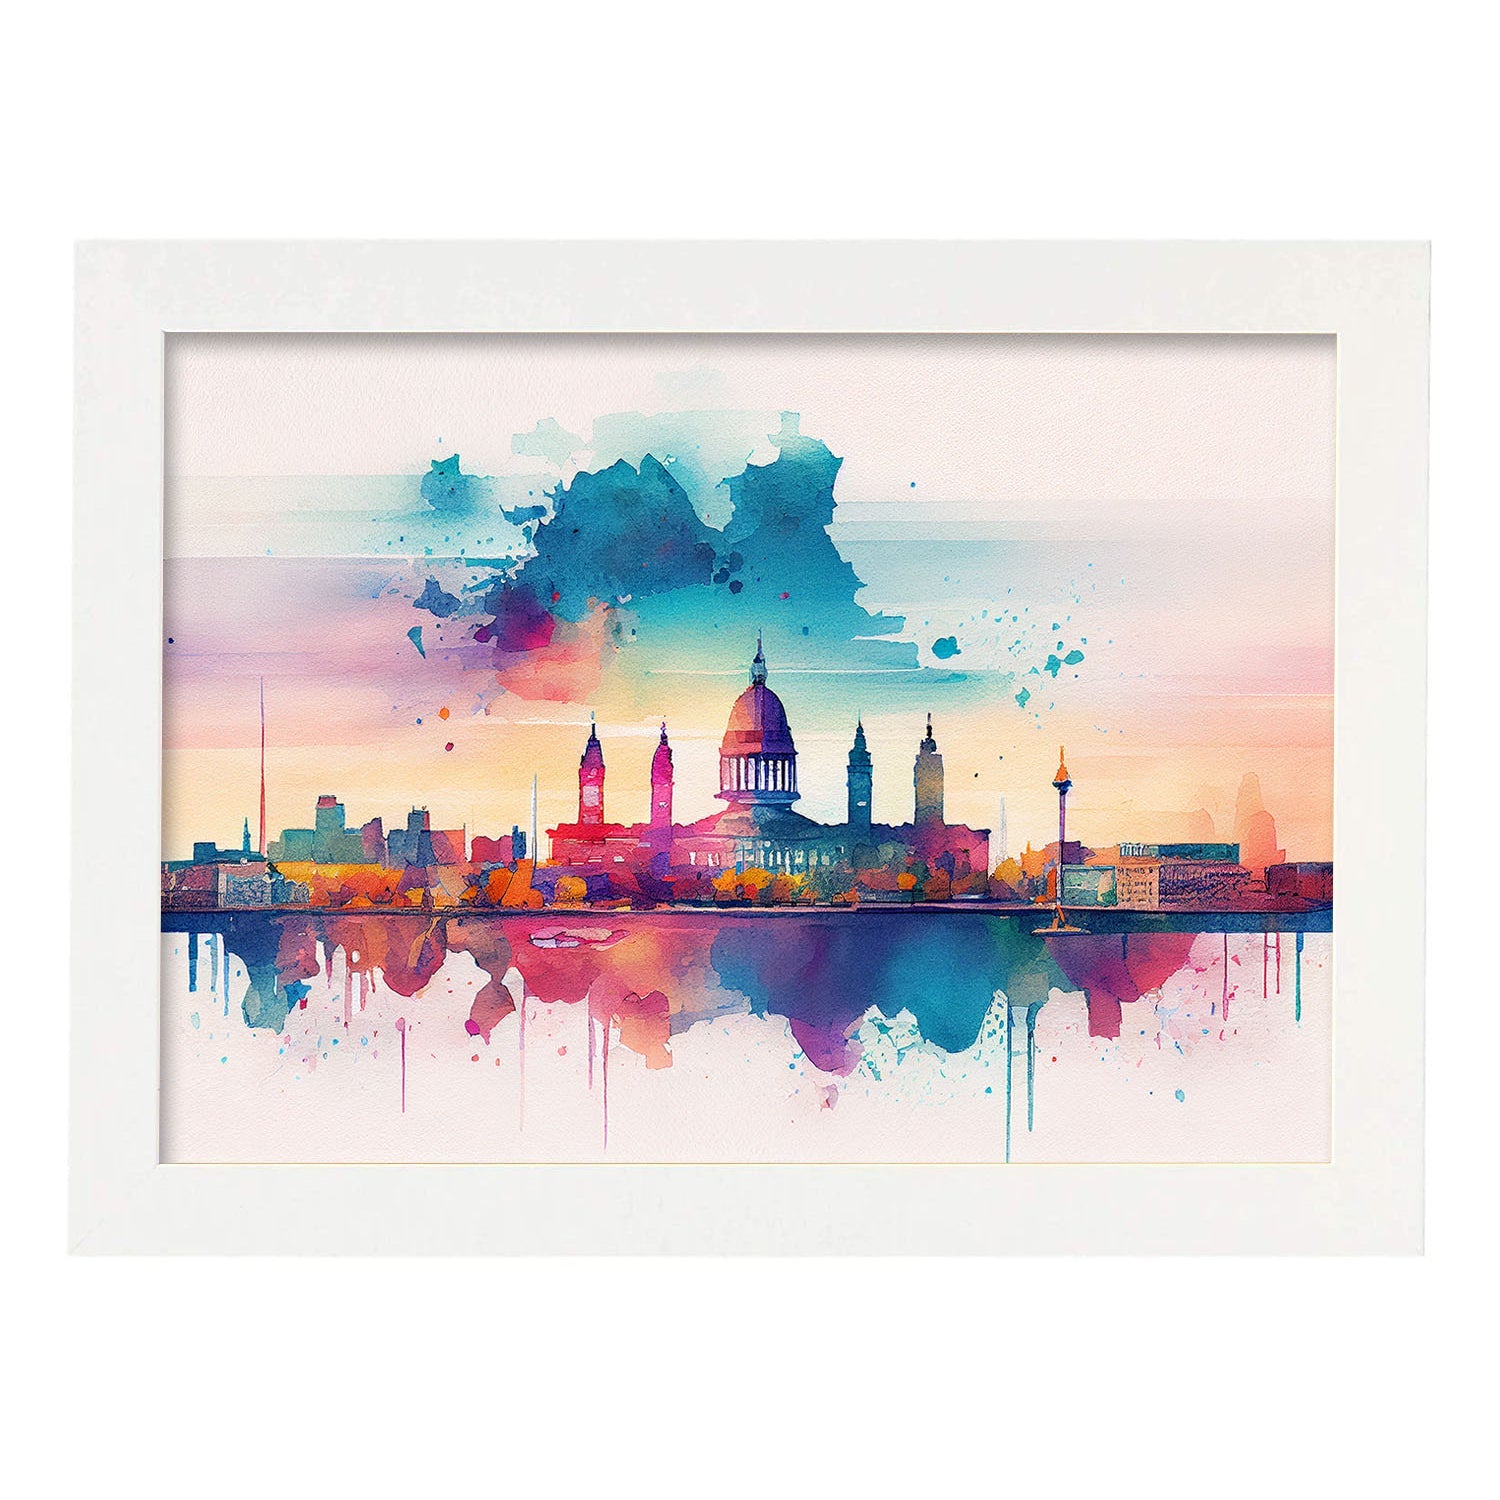 Nacnic watercolor of a skyline of the city of Helsinki. Aesthetic Wall Art Prints for Bedroom or Living Room Design.-Artwork-Nacnic-A4-Marco Blanco-Nacnic Estudio SL